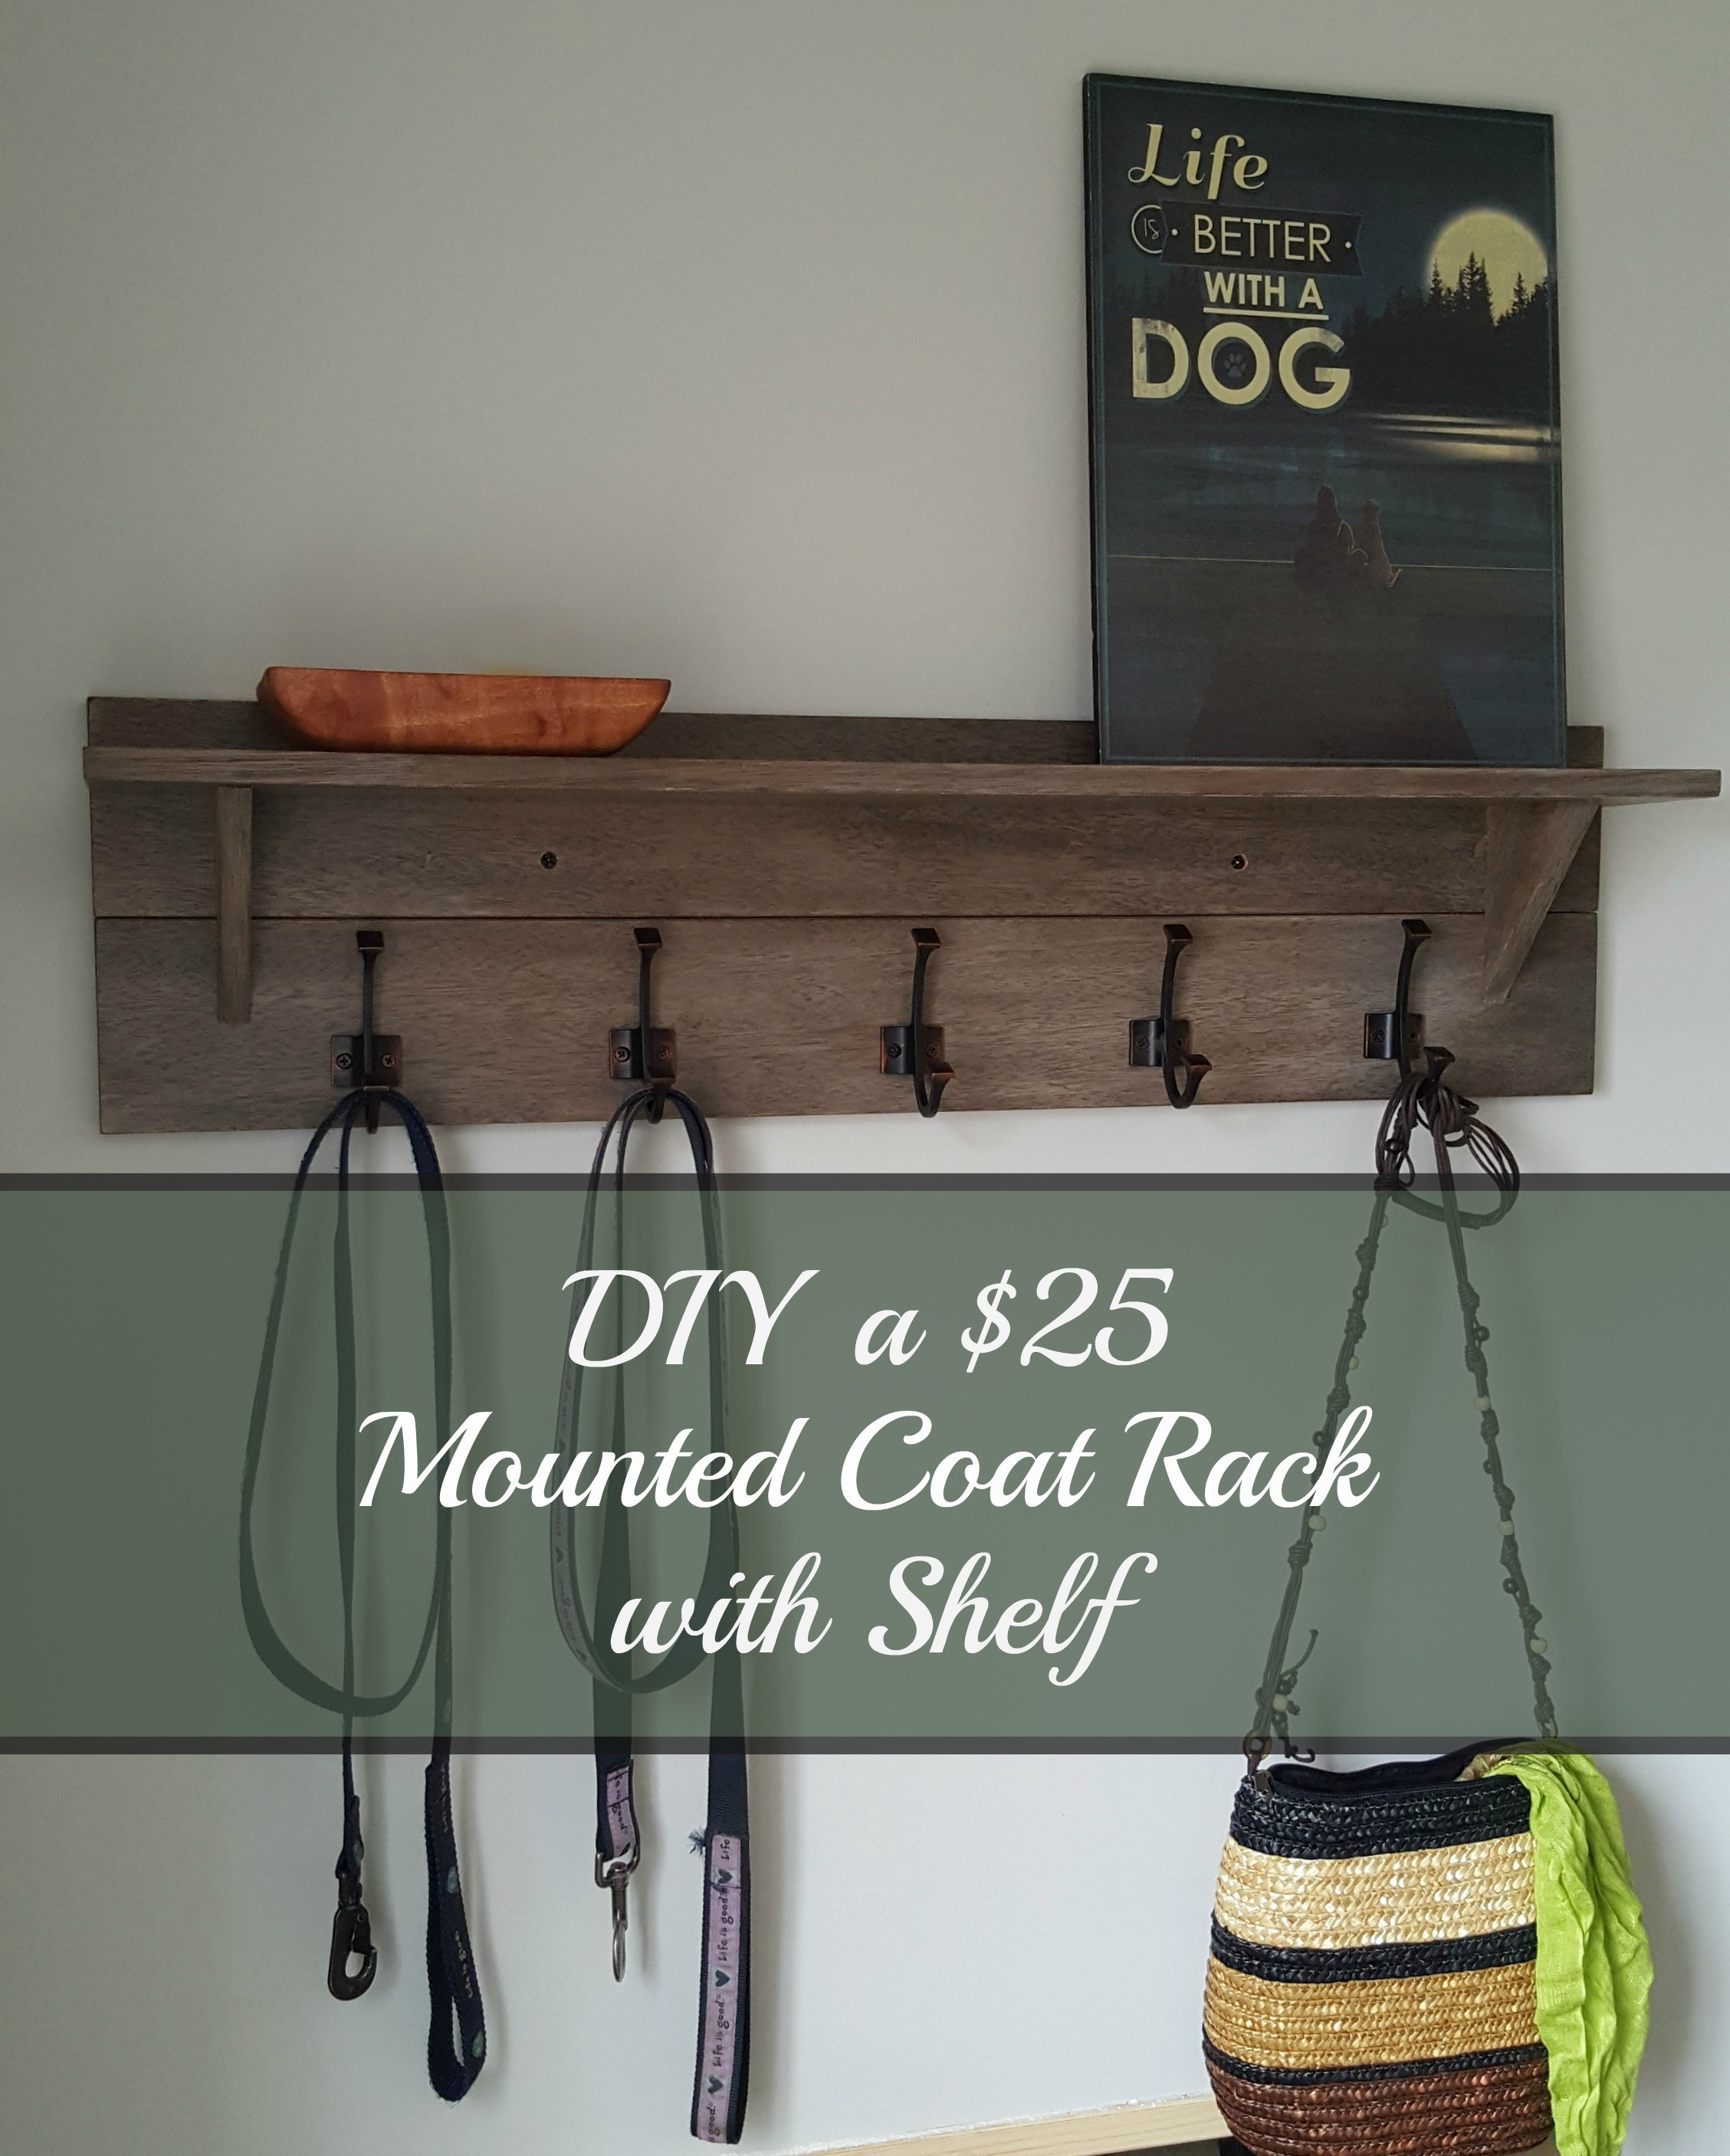 DIY Wall Coat Rack
 Turtles and Tails Wall mounted Coatrack with Shelf DIY